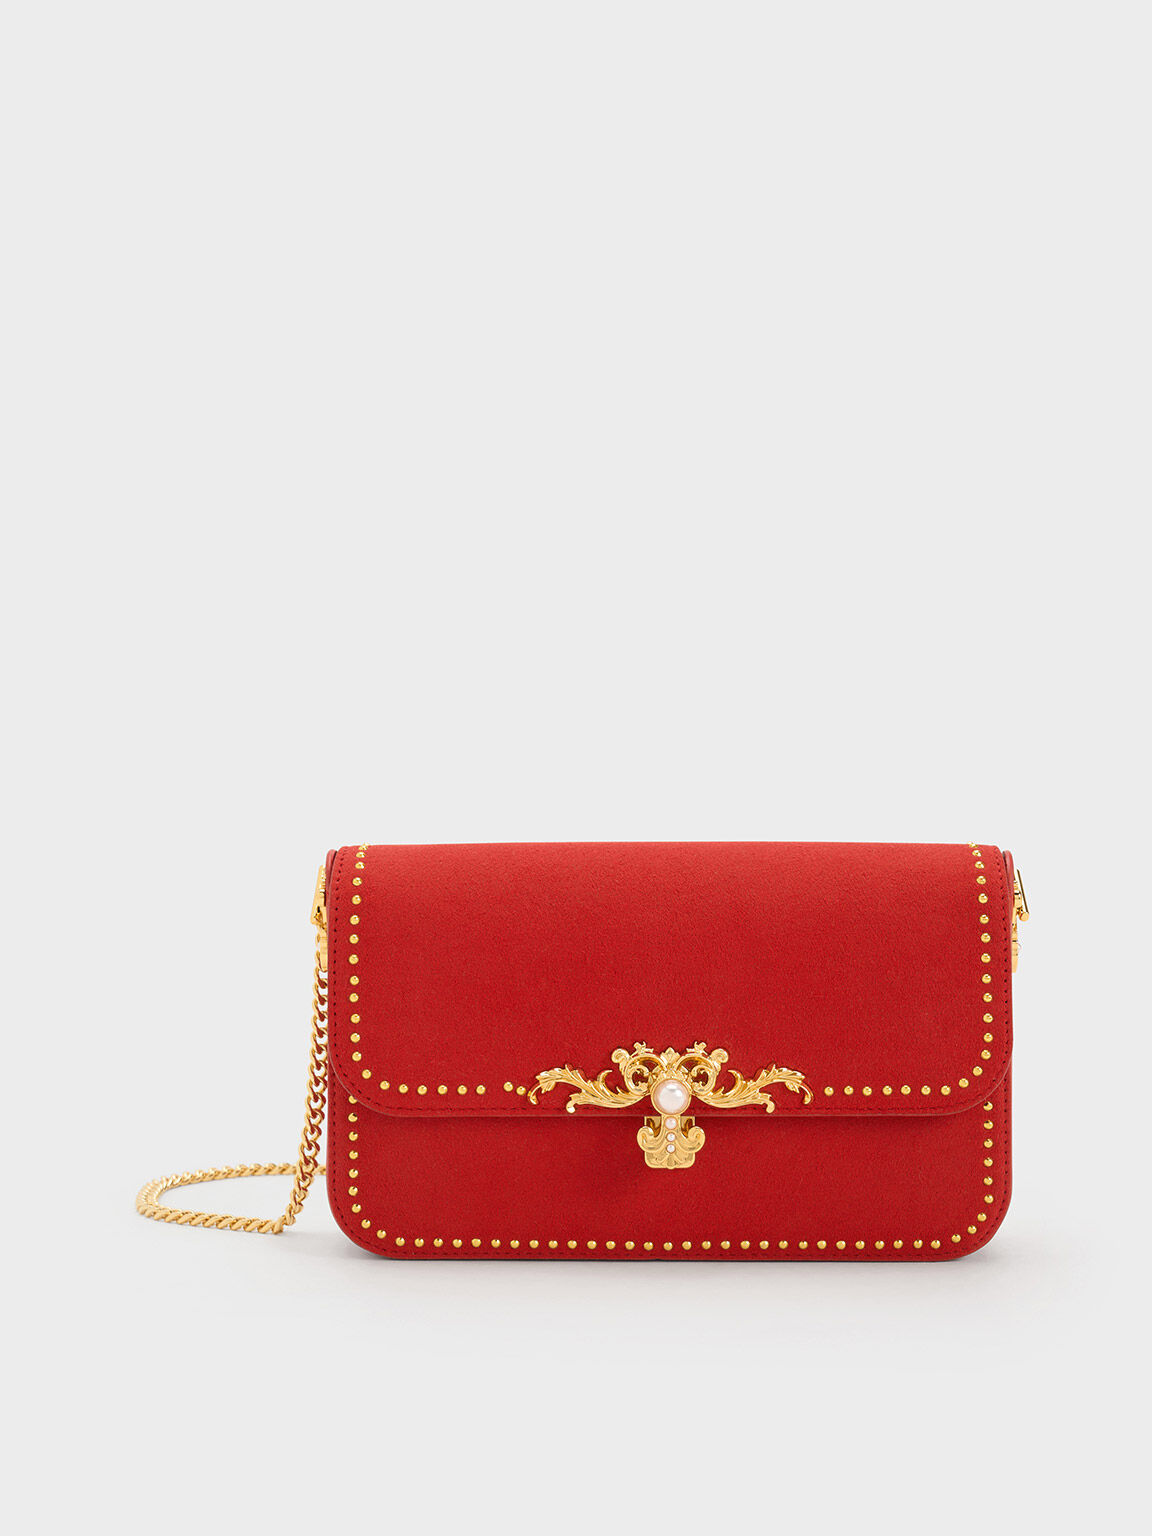 Merial Metallic Accent Studded Clutch, Red, hi-res